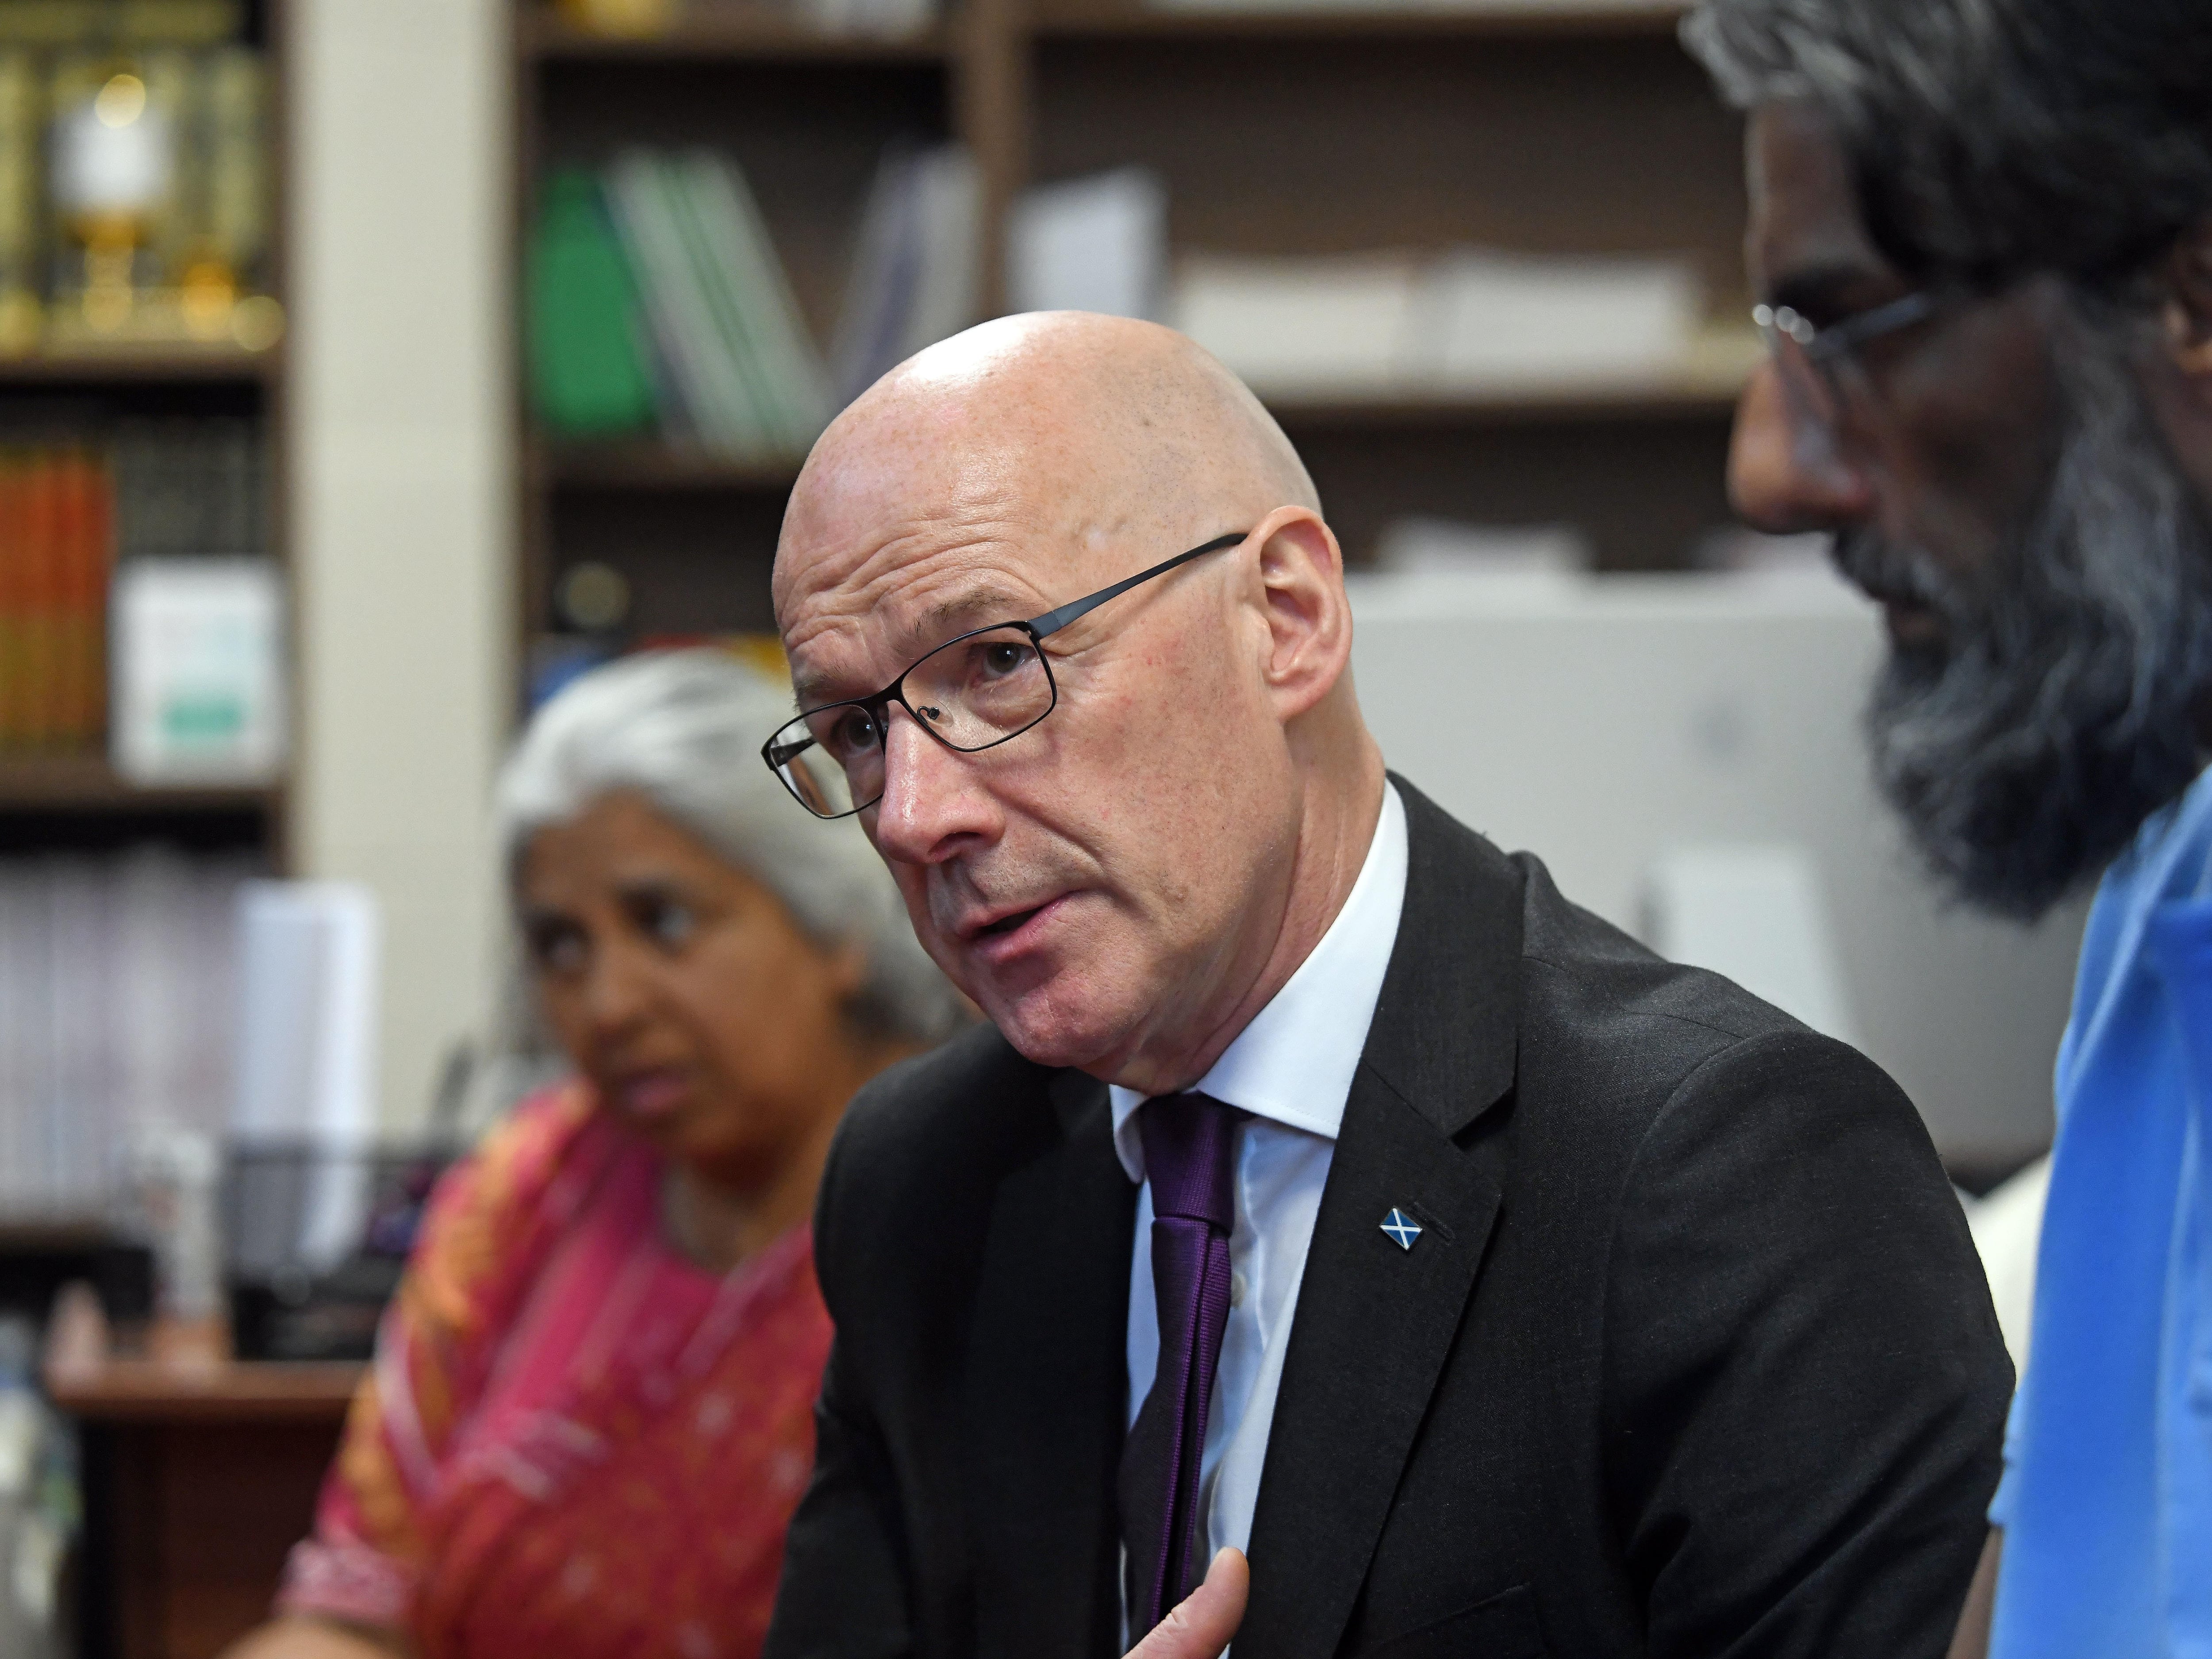 ‘Serious conversation’ needed over NHS issues, says Swinney